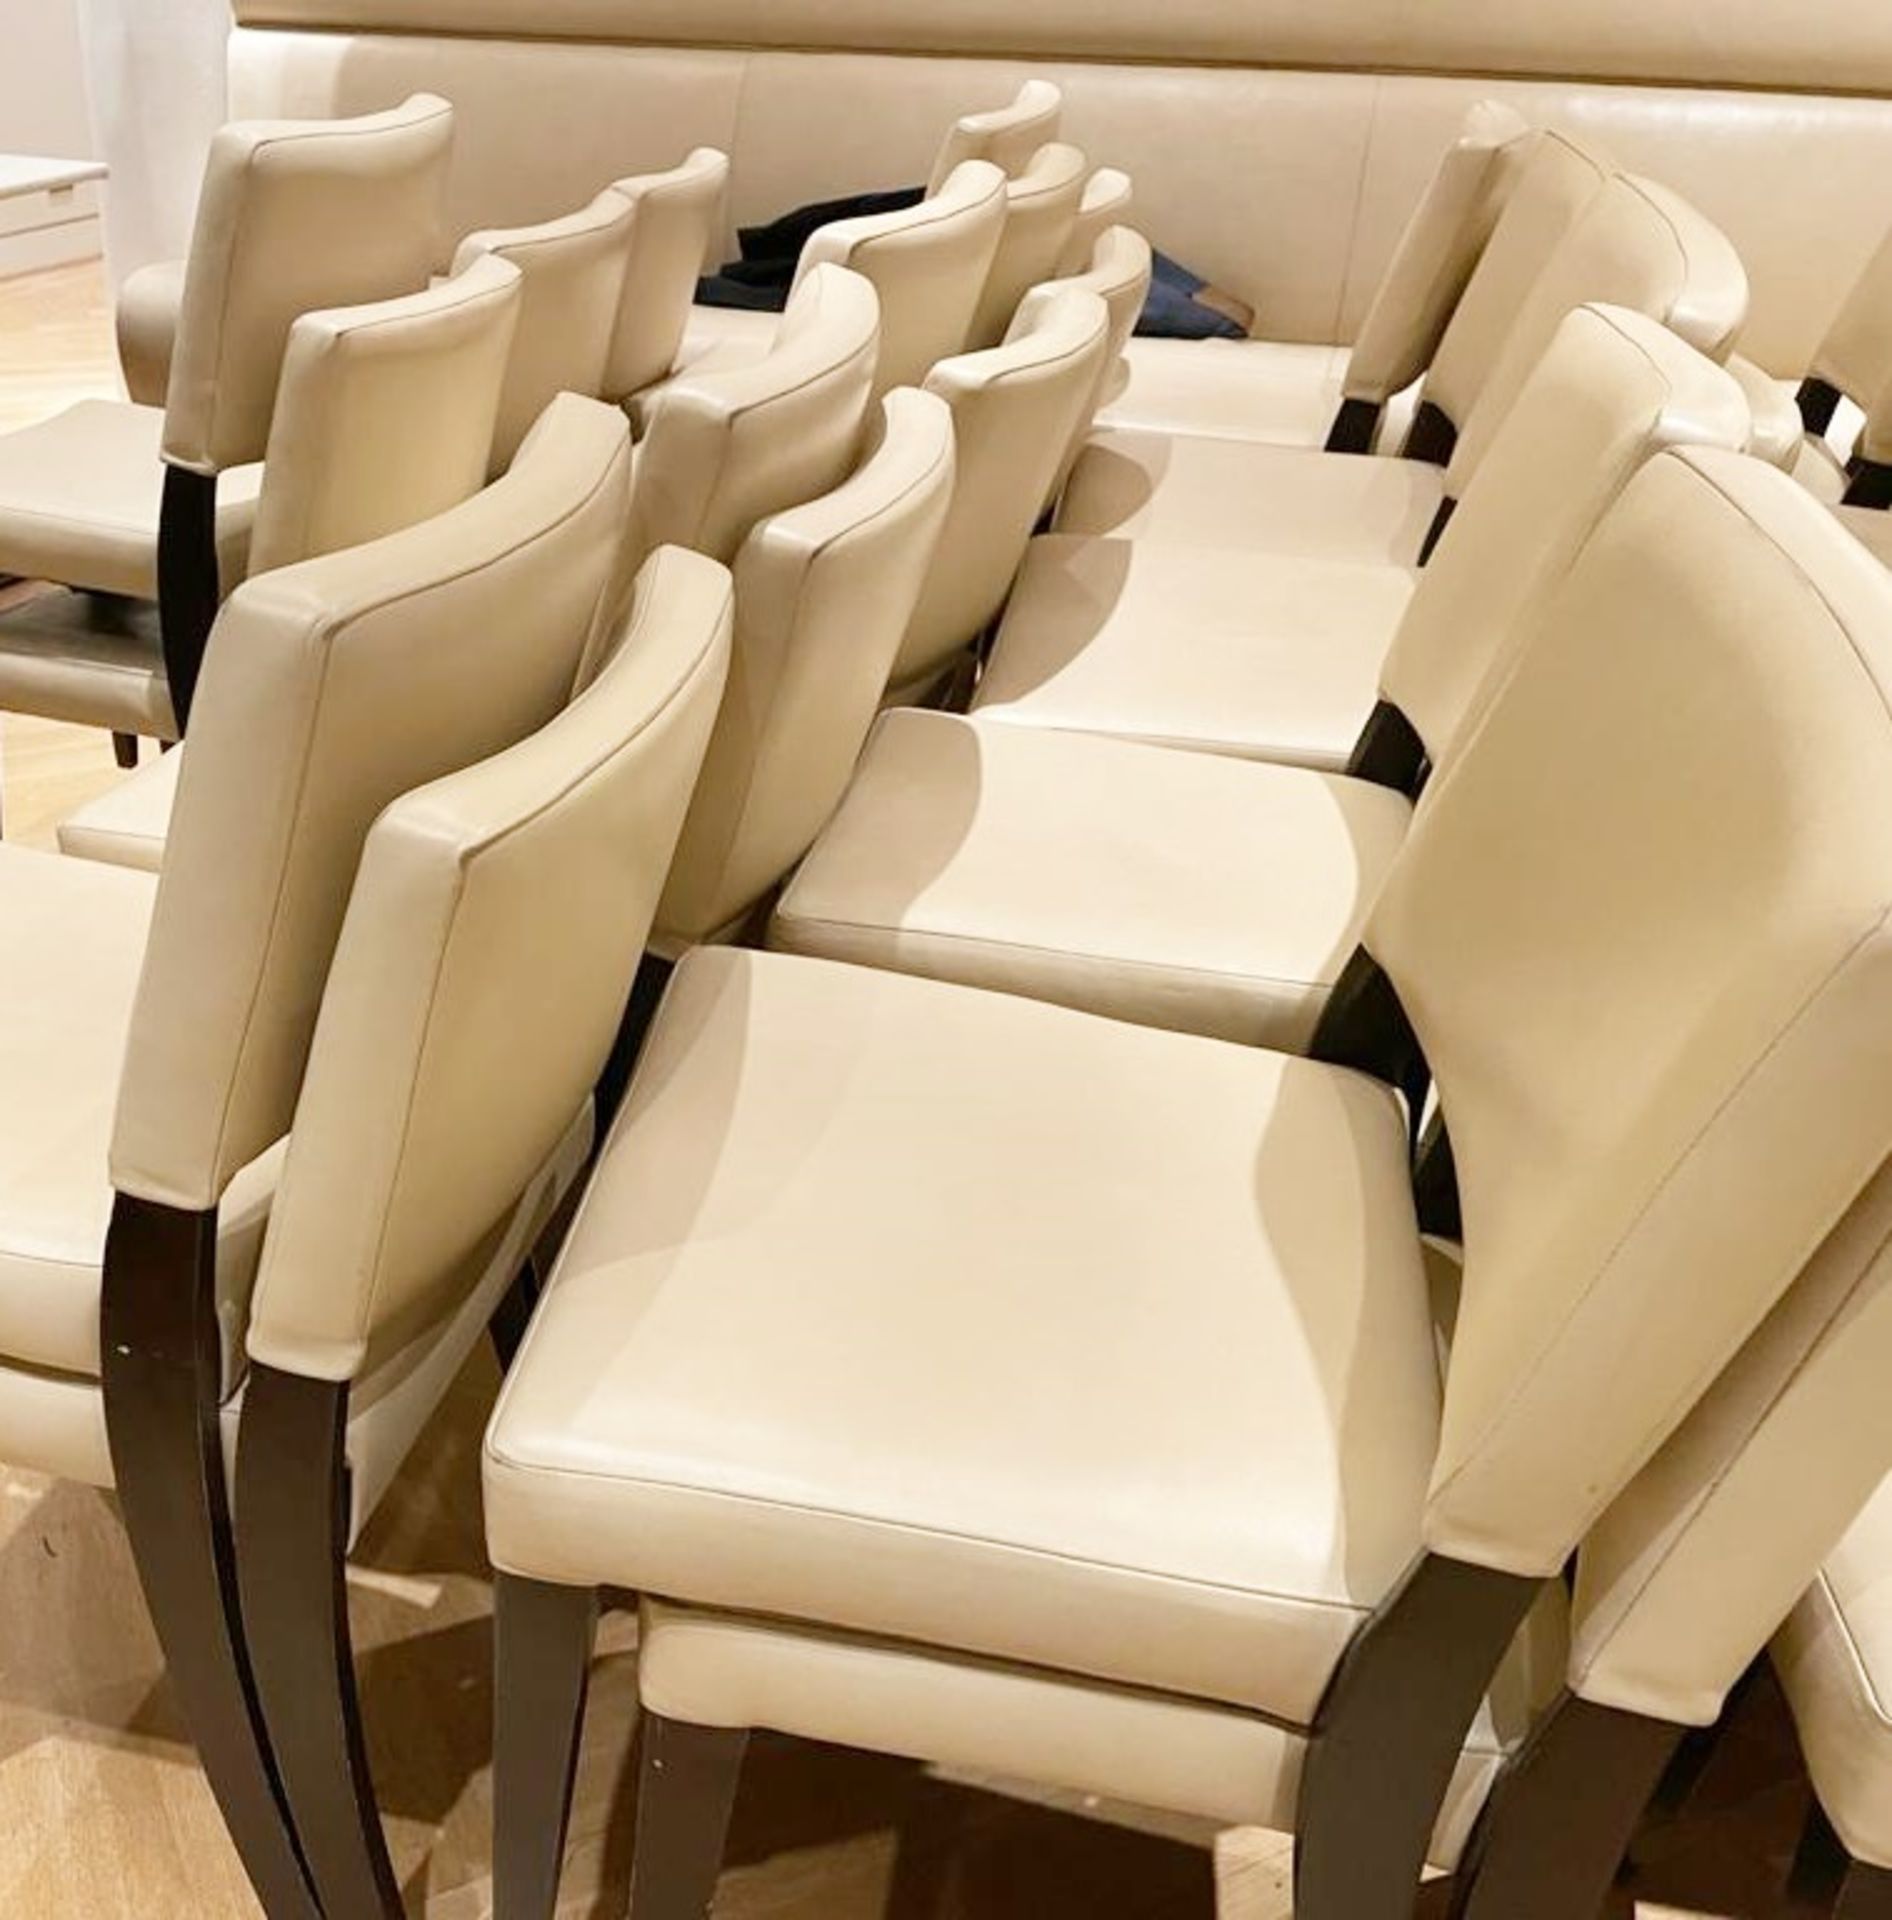 22 x Cream Leather Upholstered Restaurant Dining Chairs With Sturdy Wooden Frames - Ref: CAM527/A - Image 4 of 10